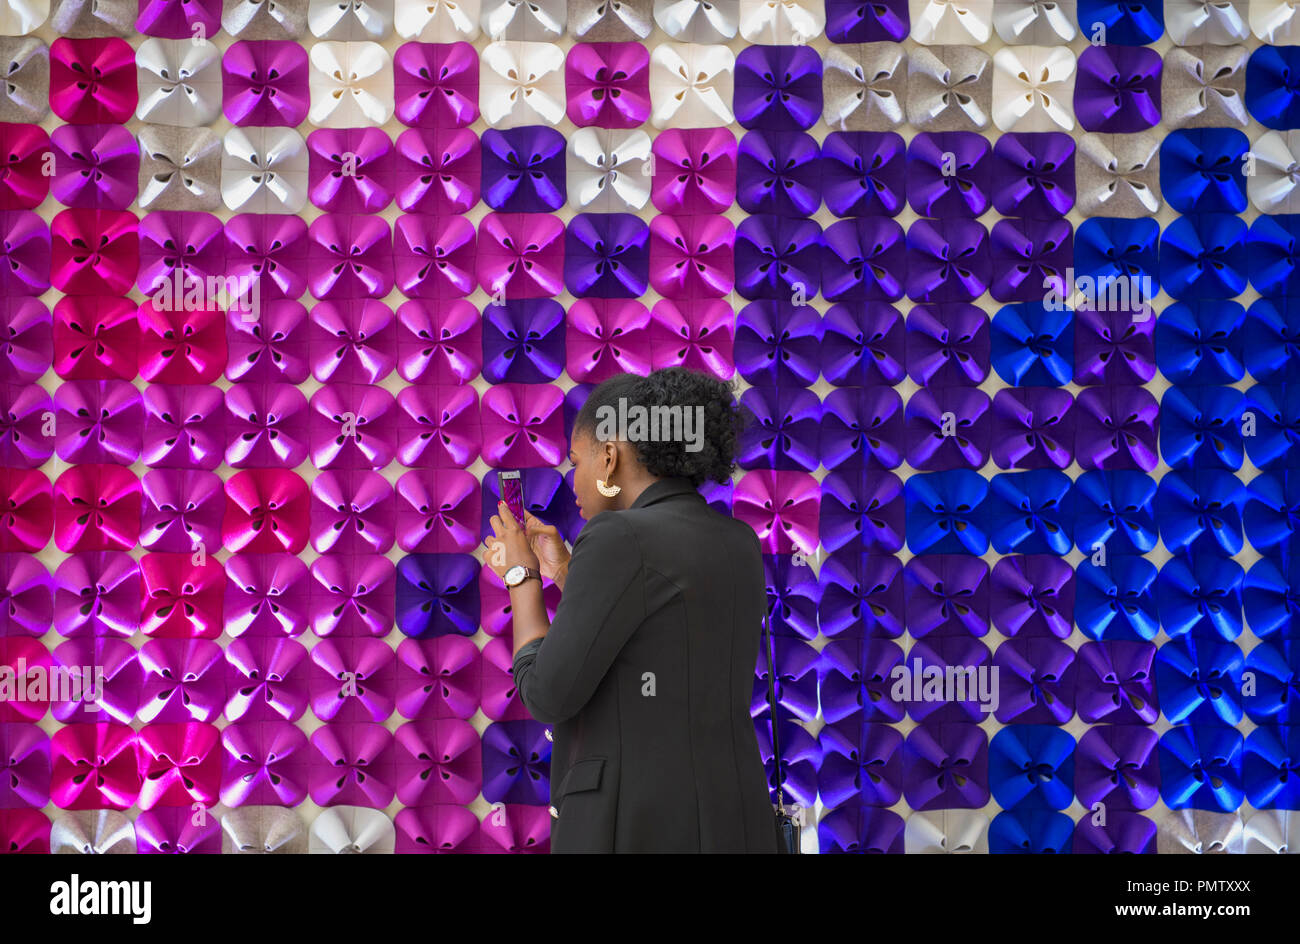 Olympia, London, UK. 19 September, 2018. 100% Design, the largest and longest-running design trade event for industry professionals in the UK, opens at Olympia with over 400 leading brands exhibiting at the heart of the West Kensington Design District. Photo: AKQ Designs acoustic wall coverings. Credit: Malcolm Park/Alamy Live News Stock Photo